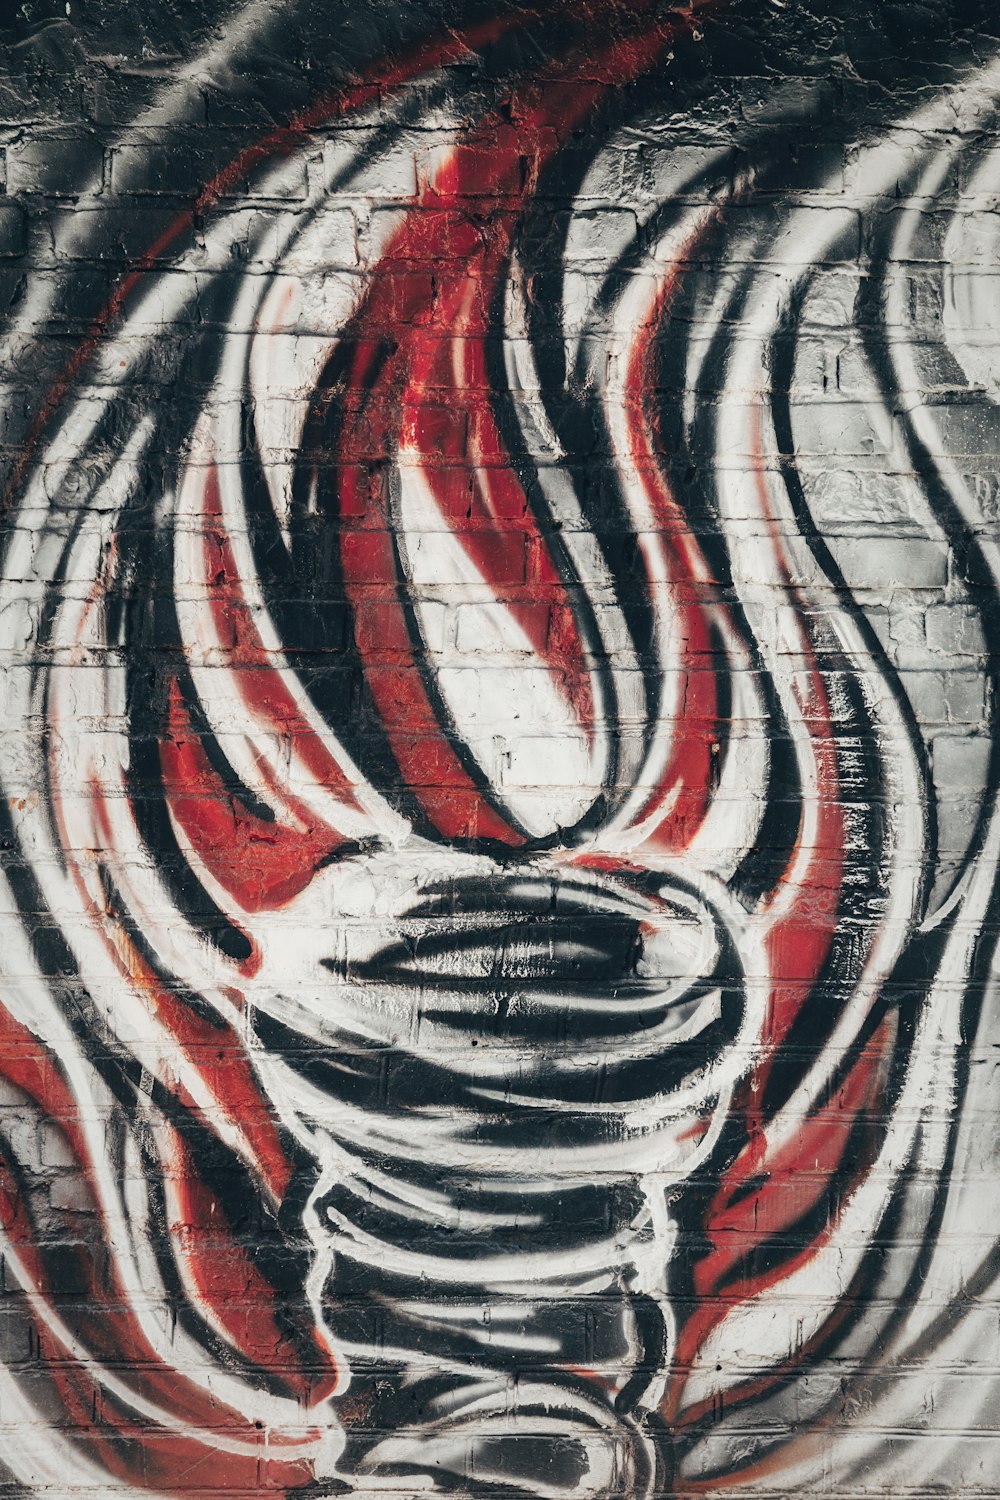 gray, red and black graffiti on a wall